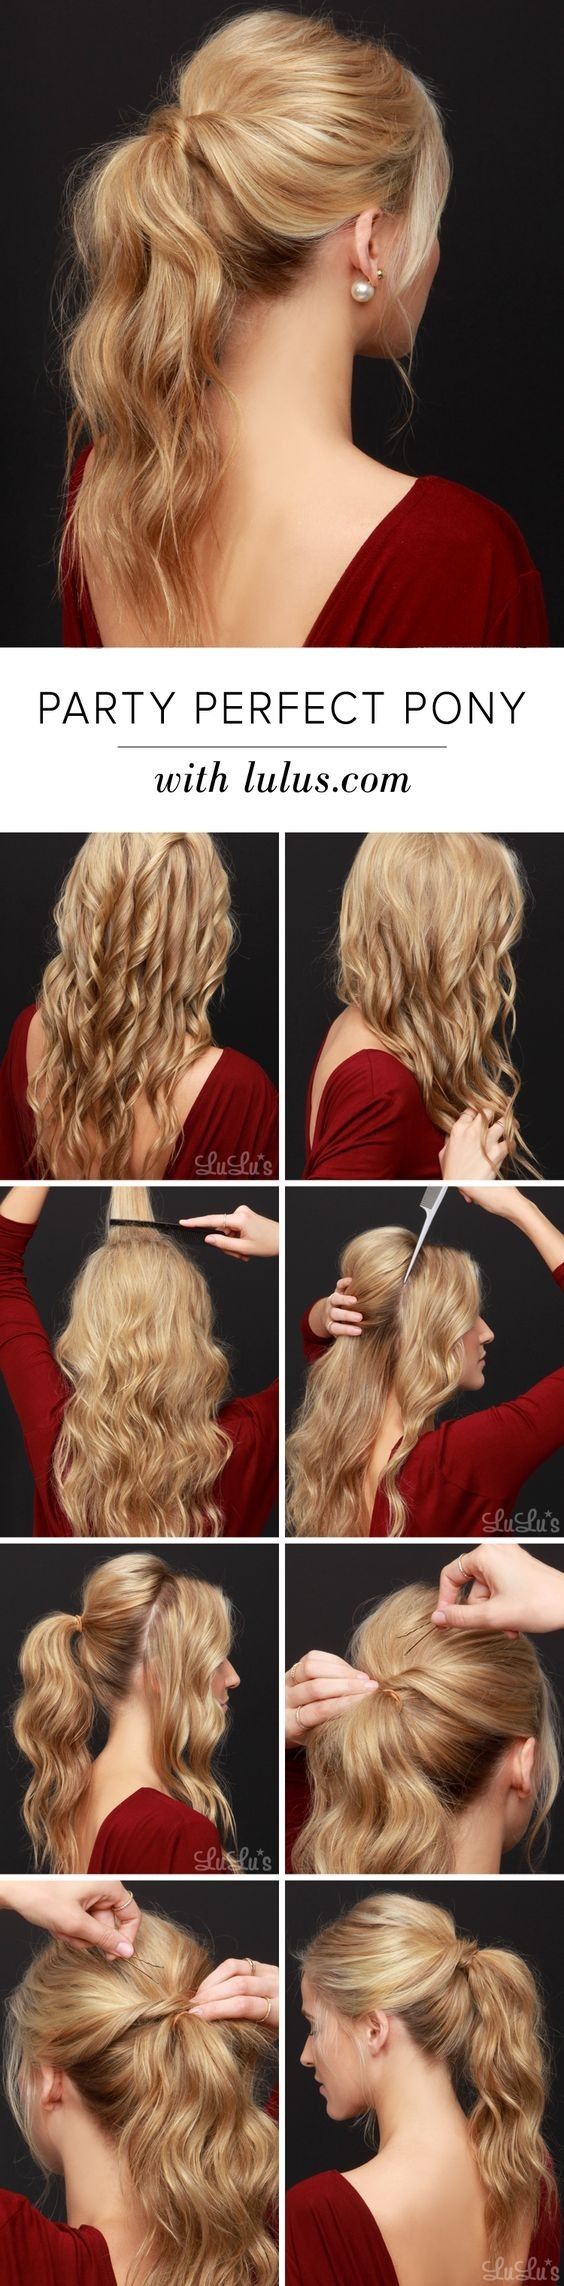 10 Easy Ponytail Hairstyles 2020